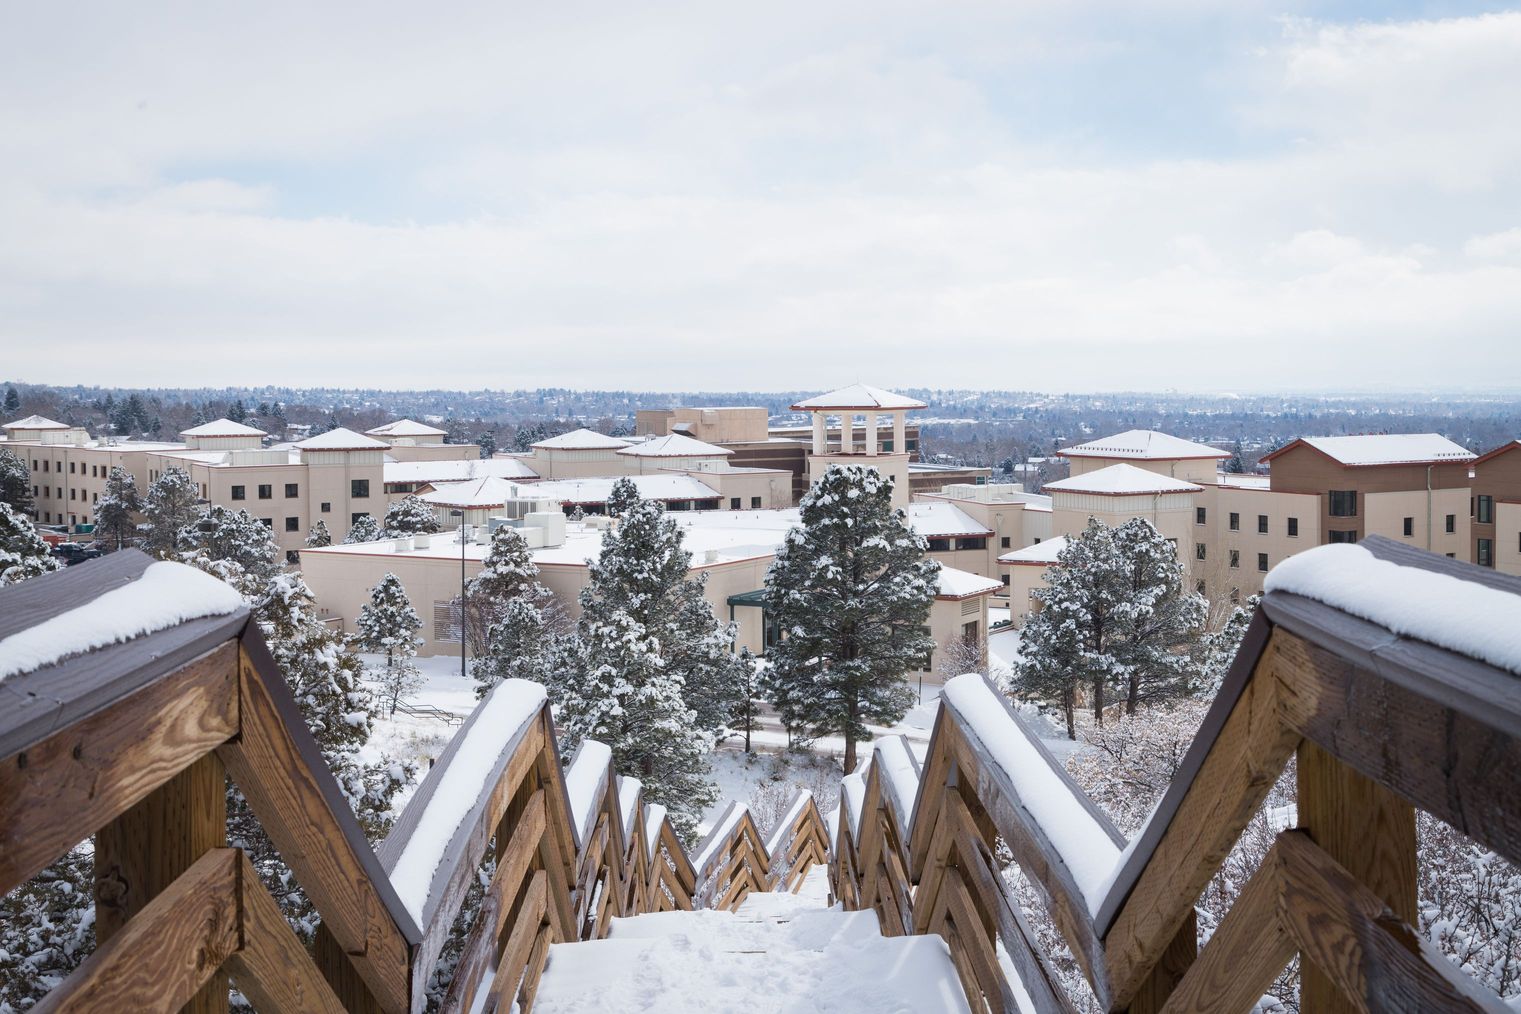 Photo of UCCS campus in the winter